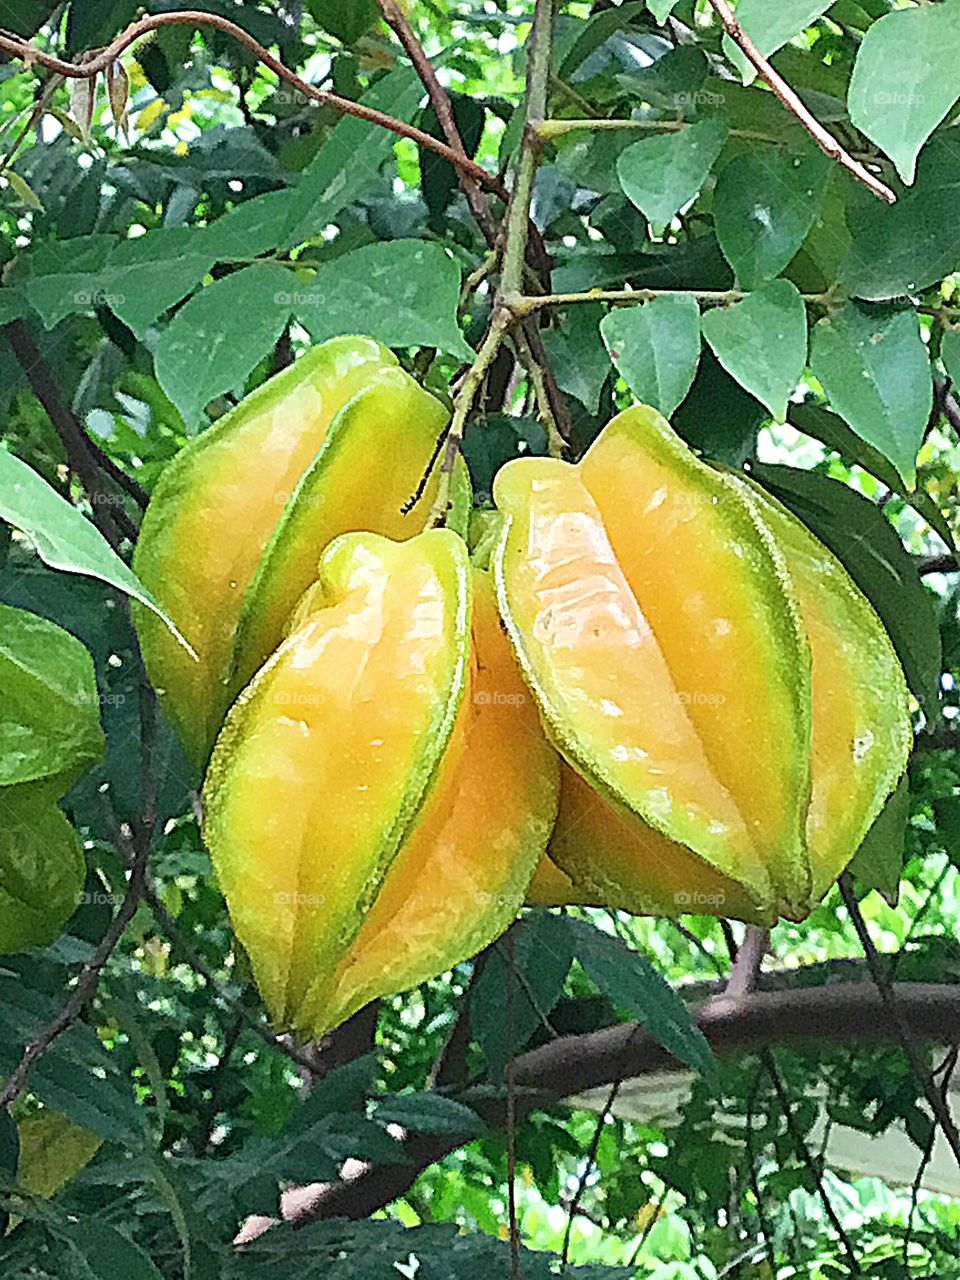 
FRUITS - Star Fruit - Fruits are an excellent source of essential vitamins and minerals, and they are high in fiber which helps reduce a persons risk of fevers heart attack